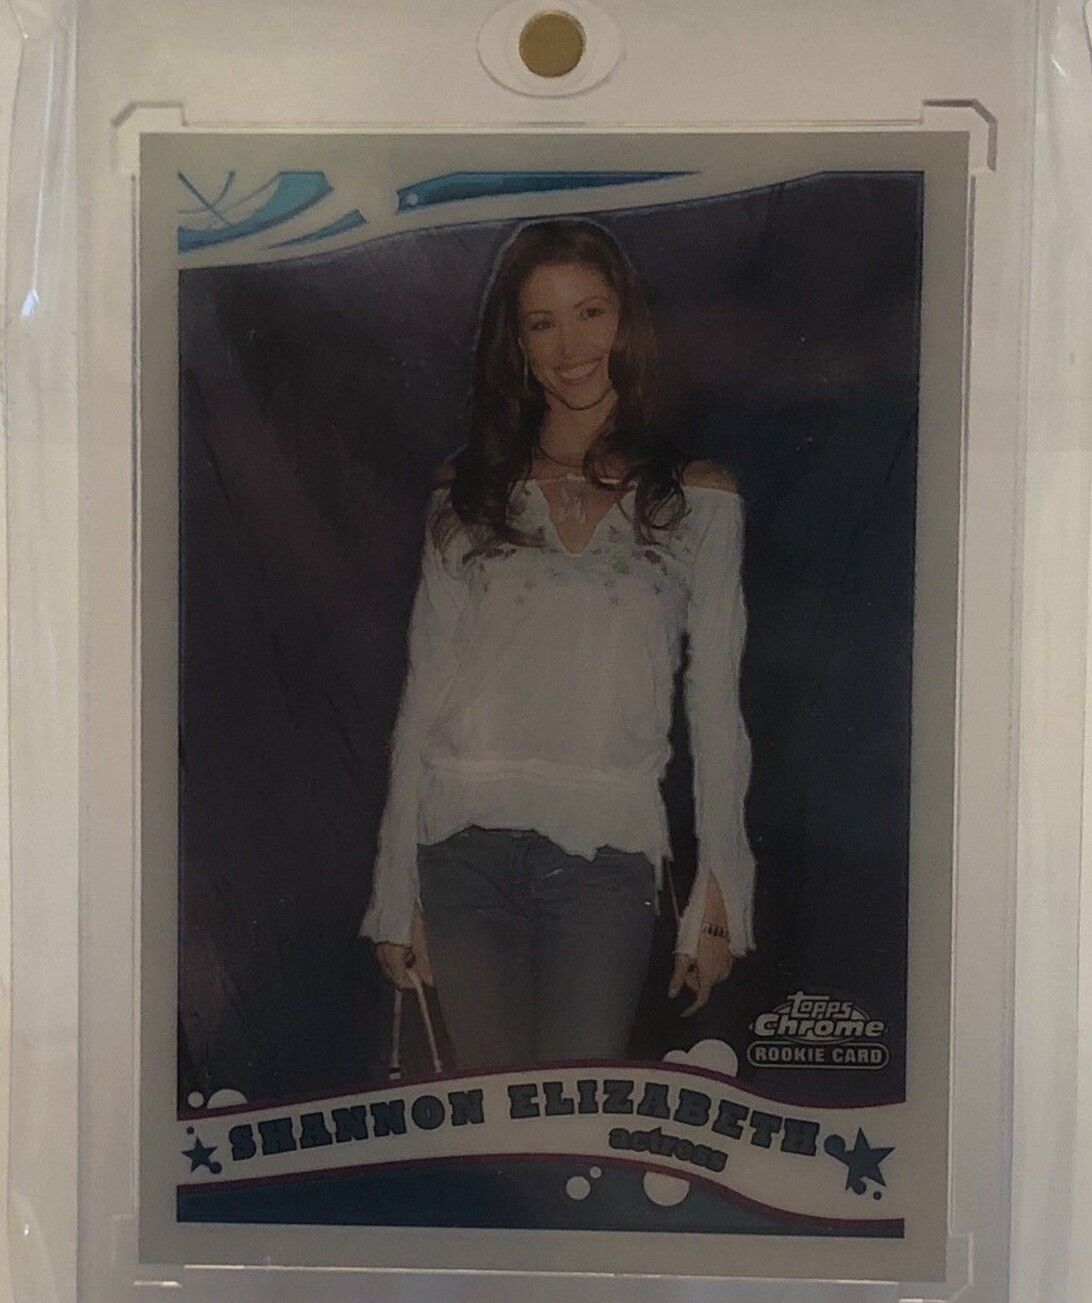 2006 Shannon Elizabeth Topps Chrome #218 Rookie Card Actress/Model  American Pie